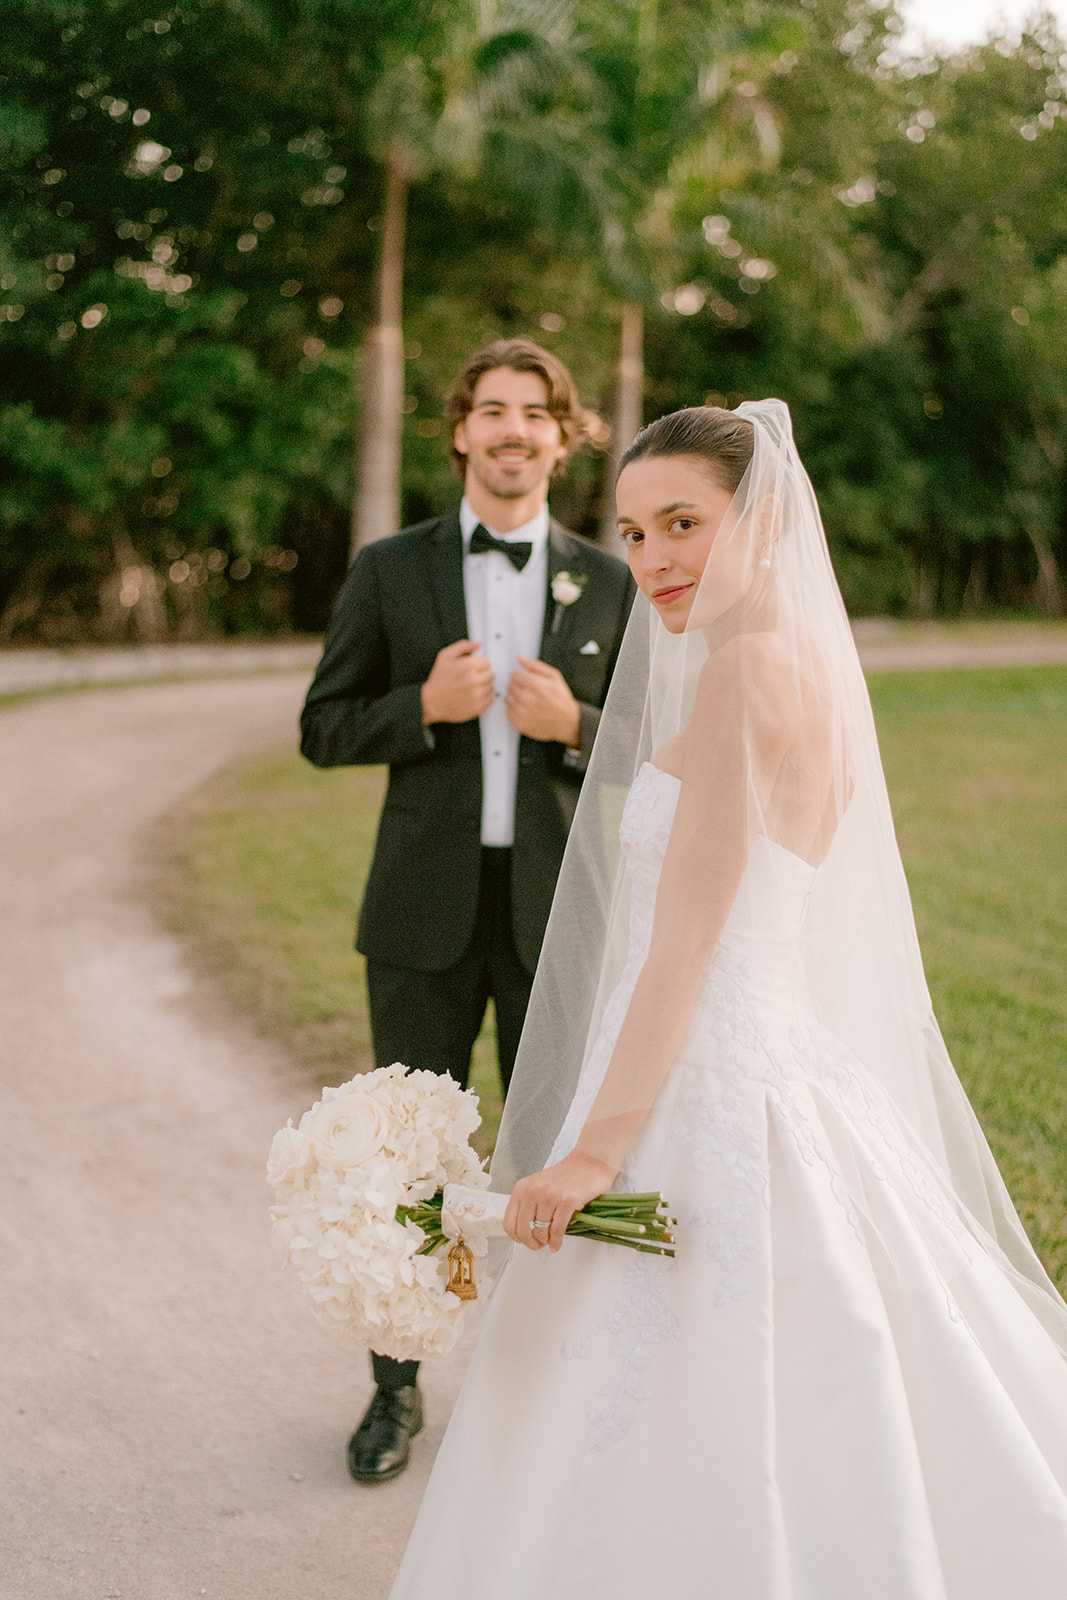 Miami Florida's best wedding photographer at Bales & Shelby's unforgettable wedding day
